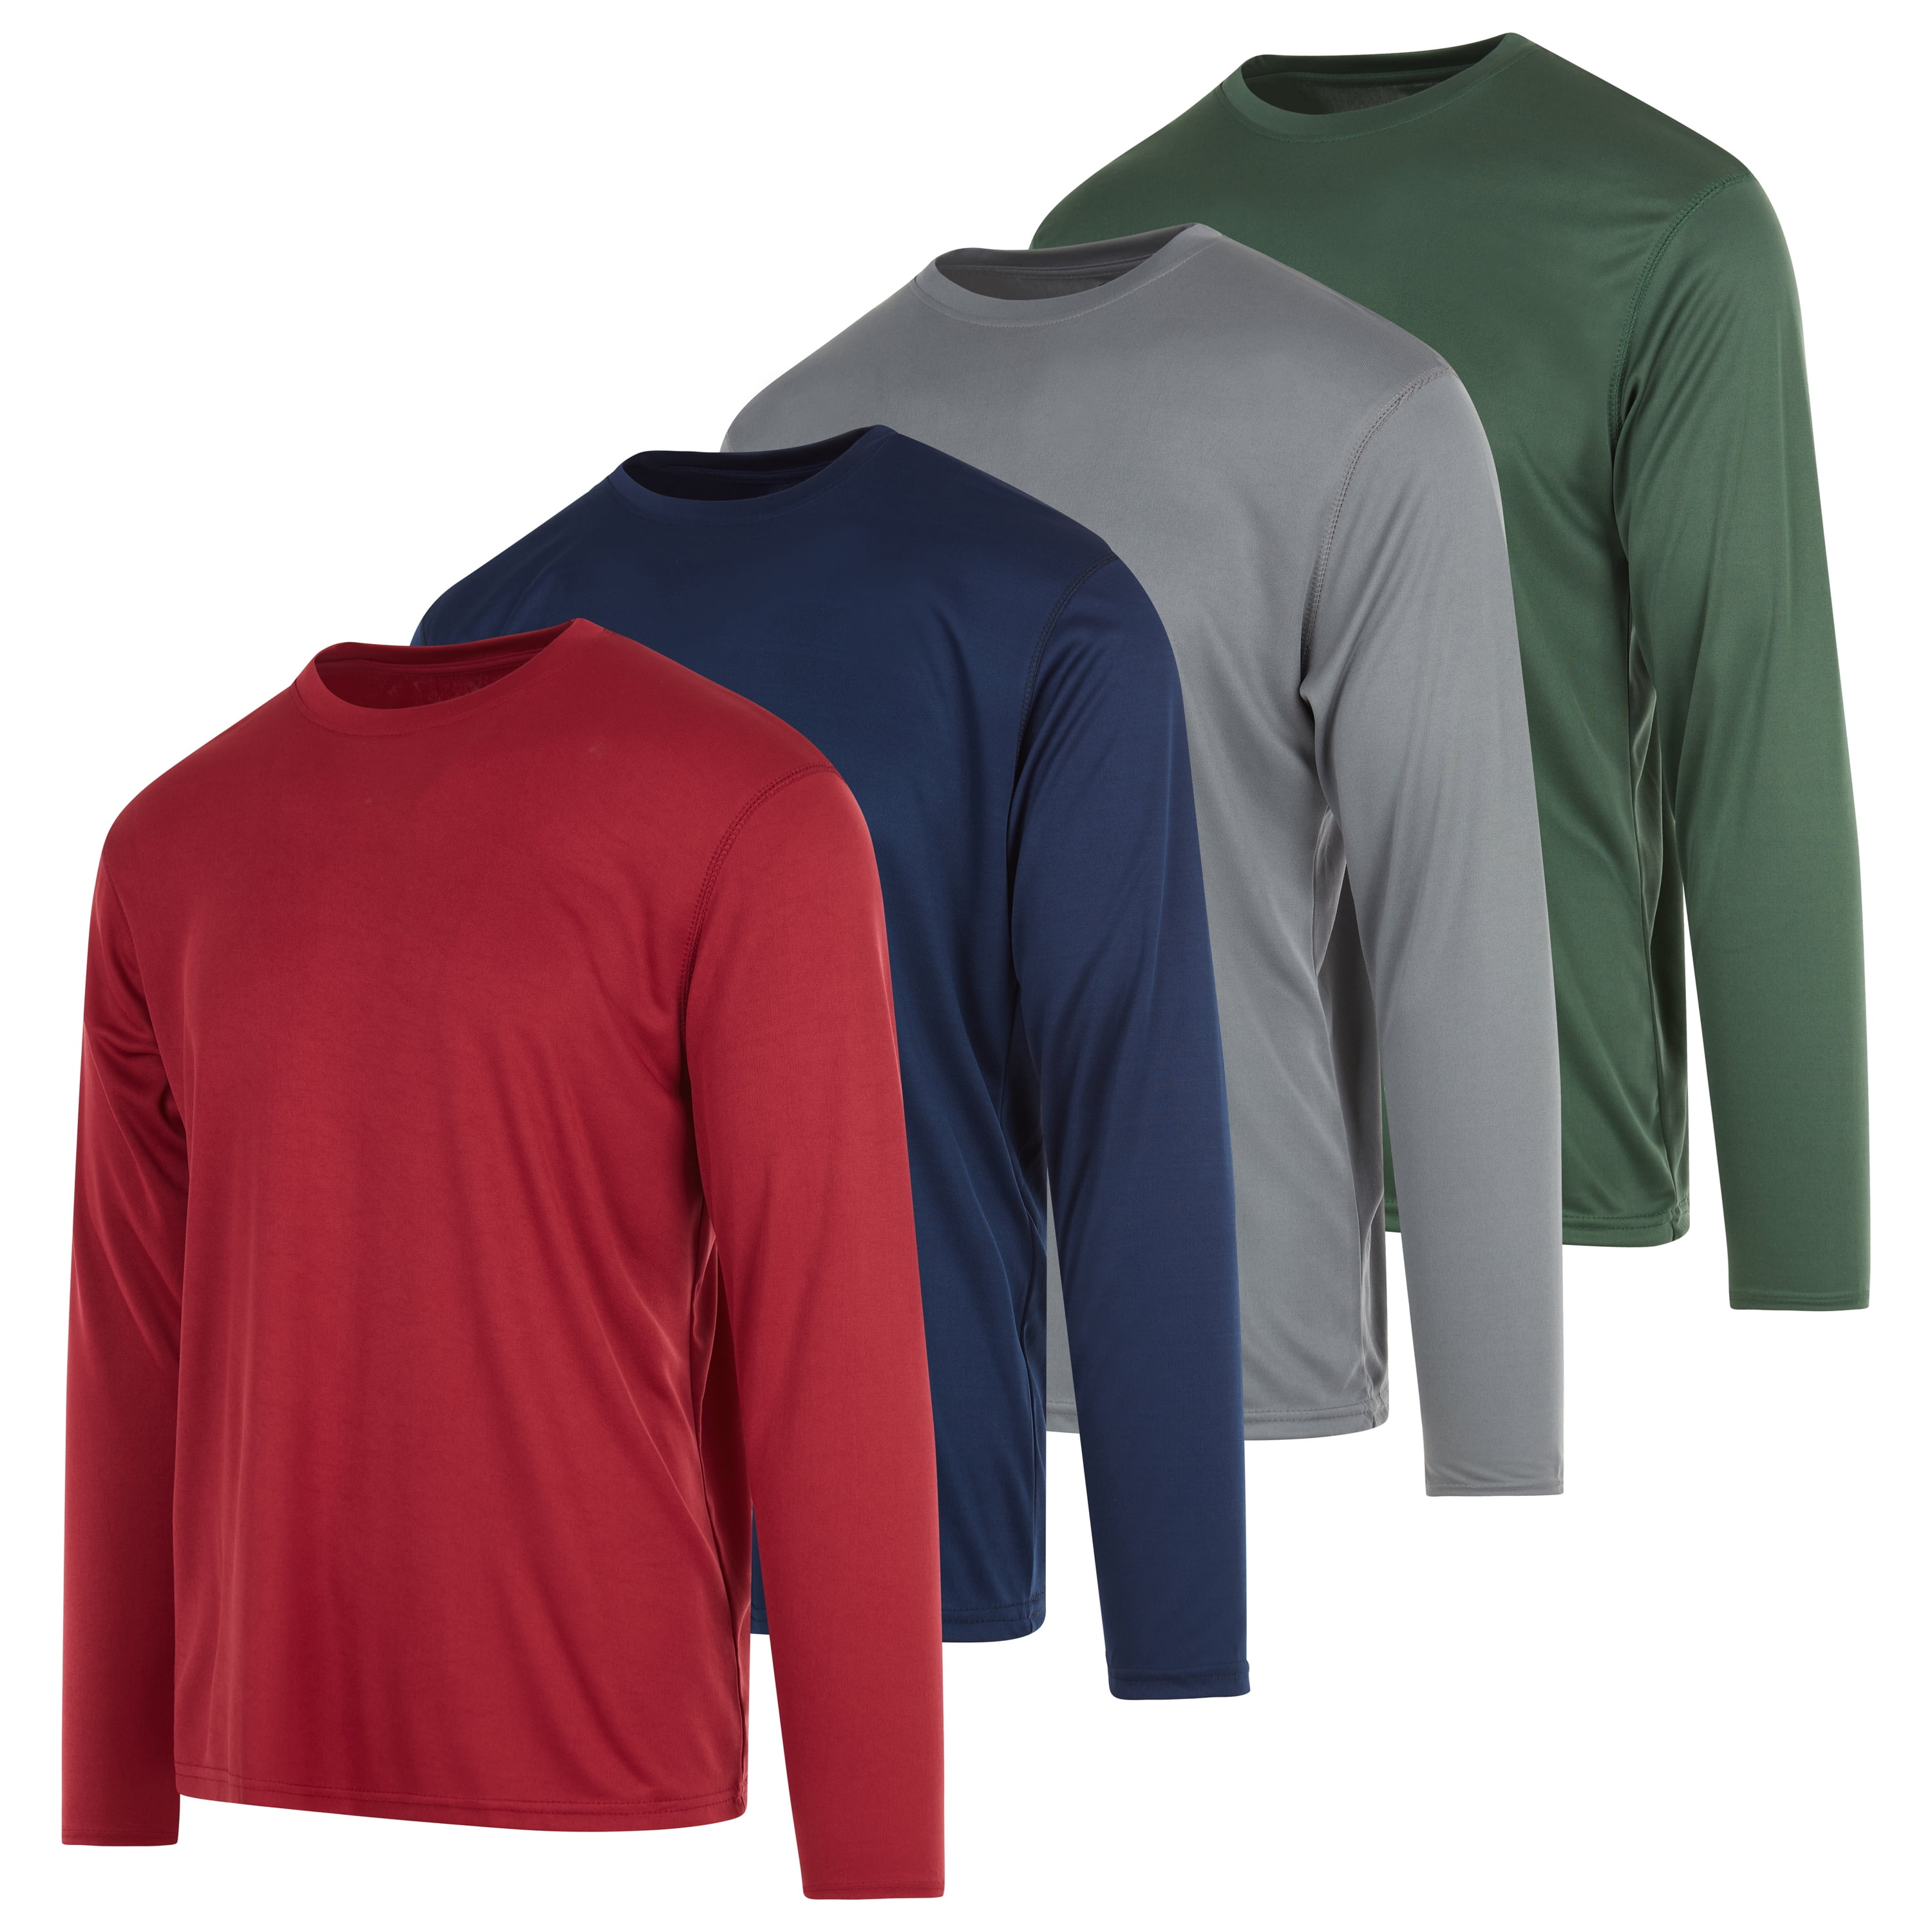 Dri-Fit Long Sleeve T Shirts for Men-4 Pack- Moisture Wicking, Quick ...